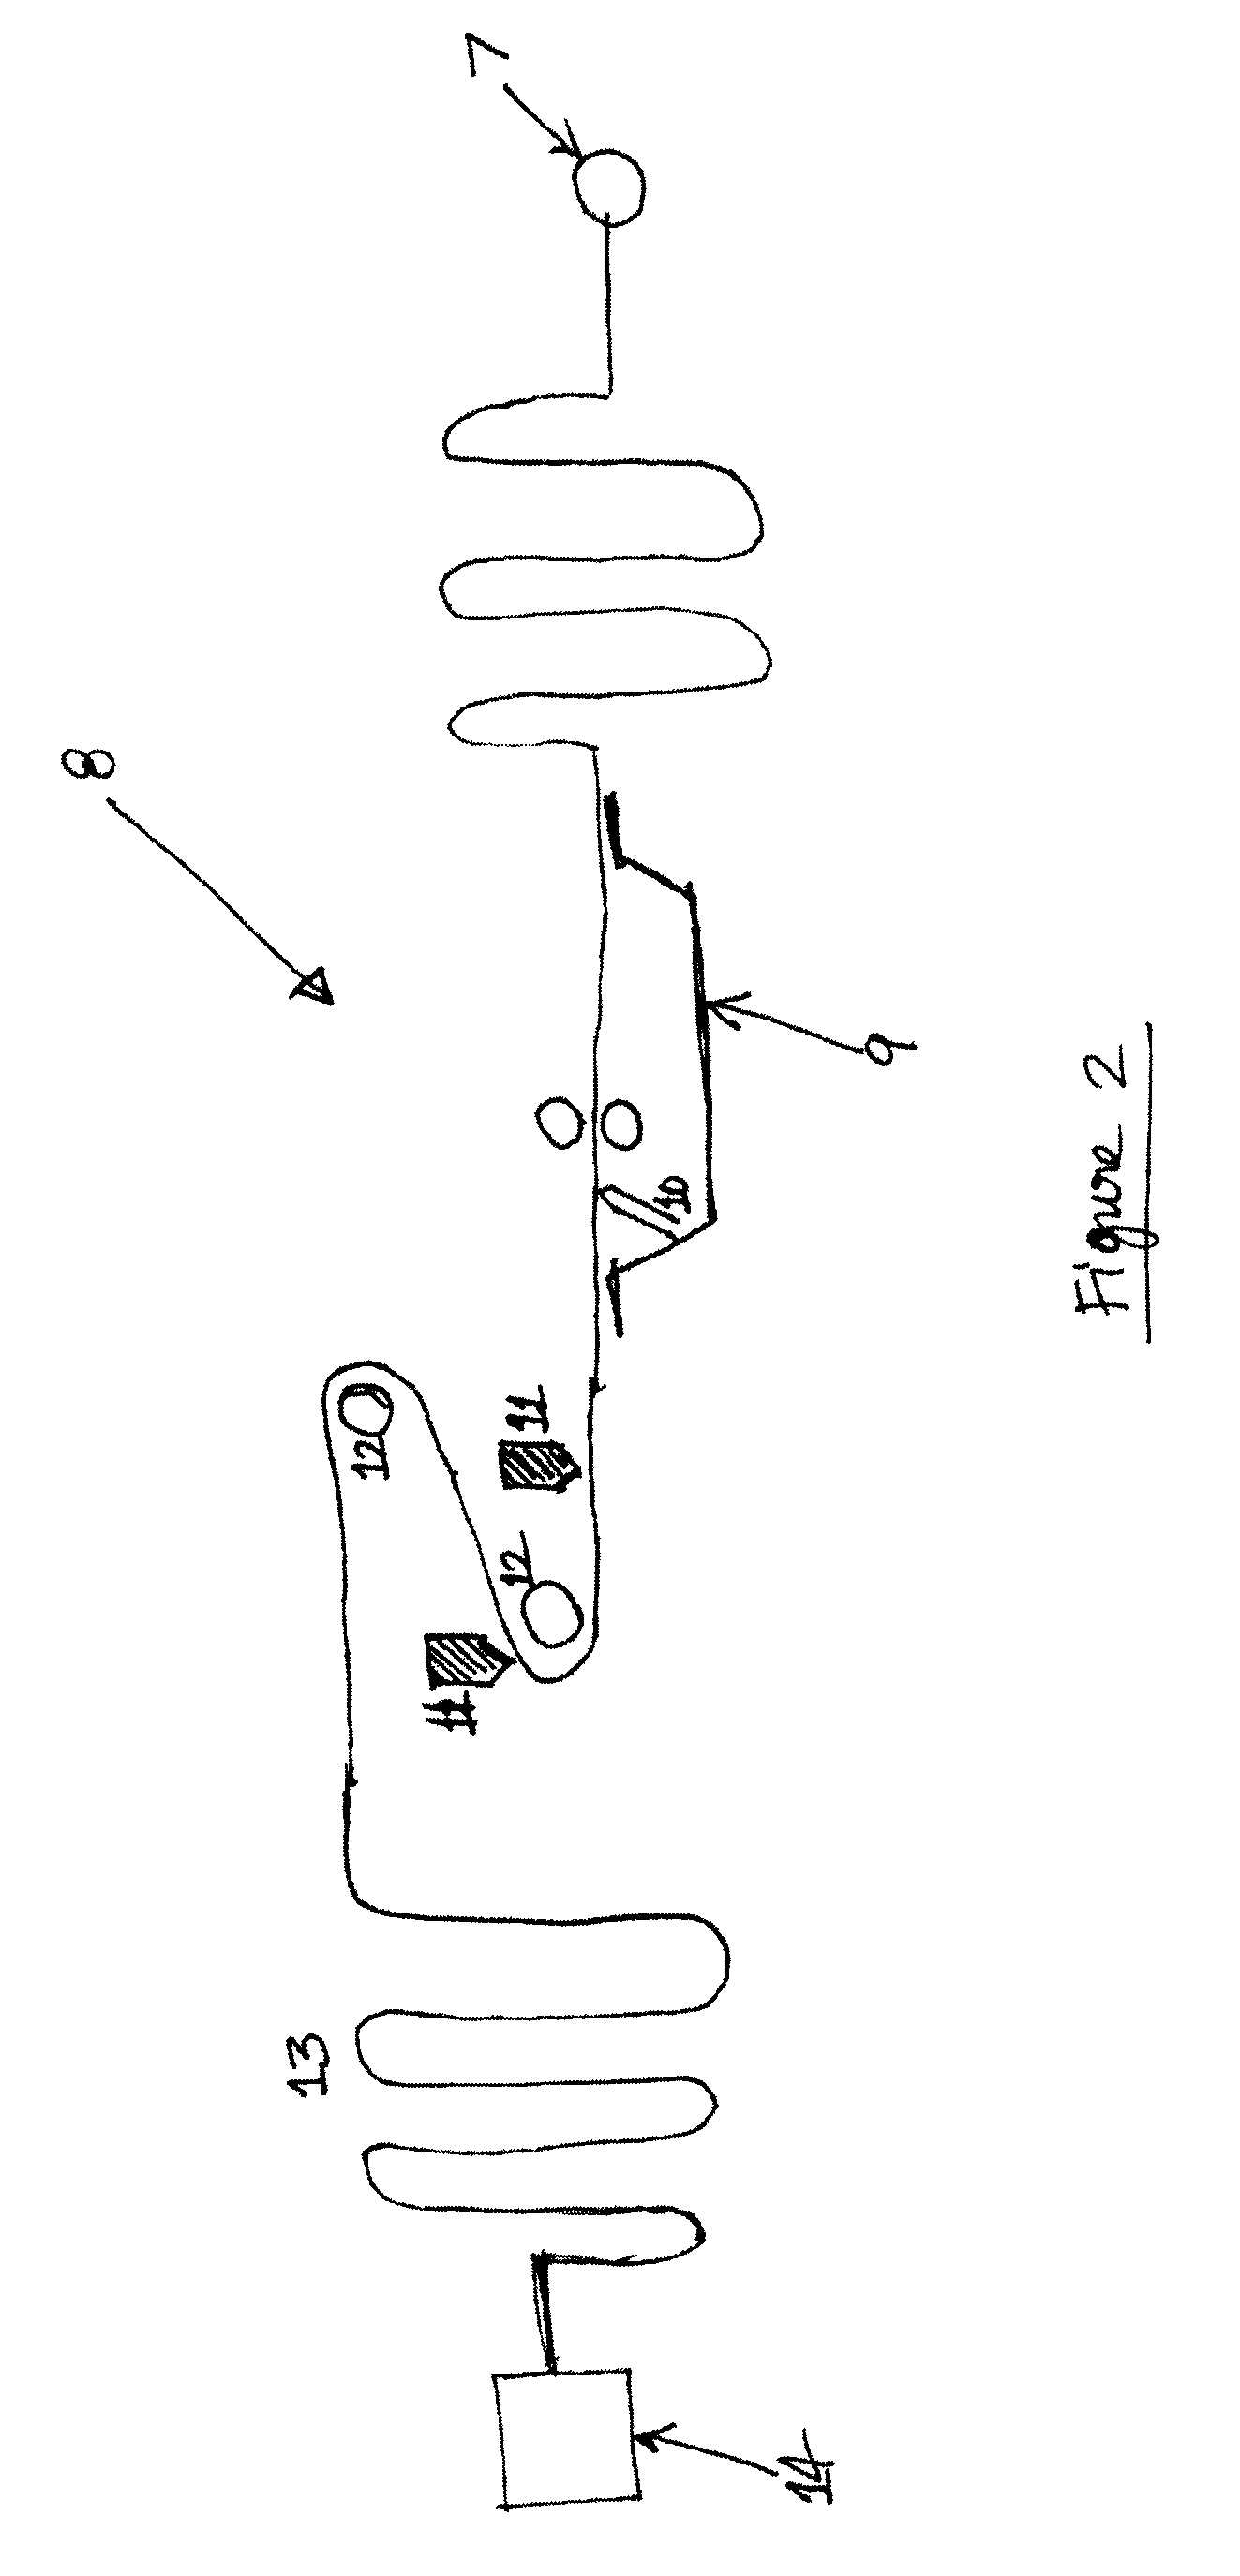 Roofing underlayment and method of producing same